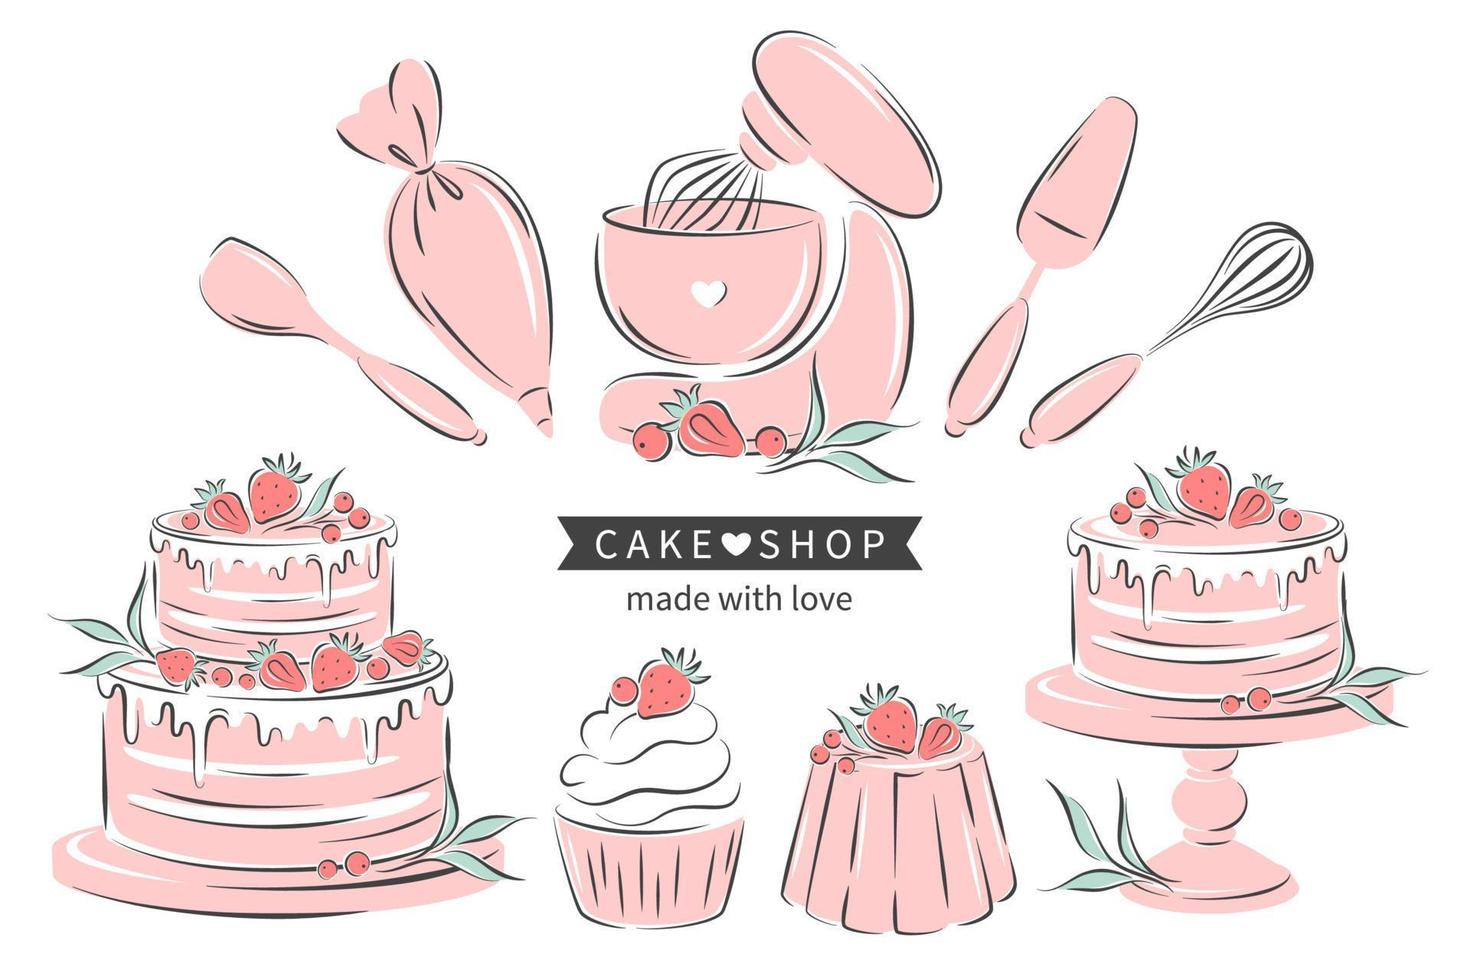 Cake shop. Set tools for cooking, baking items  dessert and pastry dishes whisk, cutlery, spatulas, mixer. Different cakes. Vector illustration